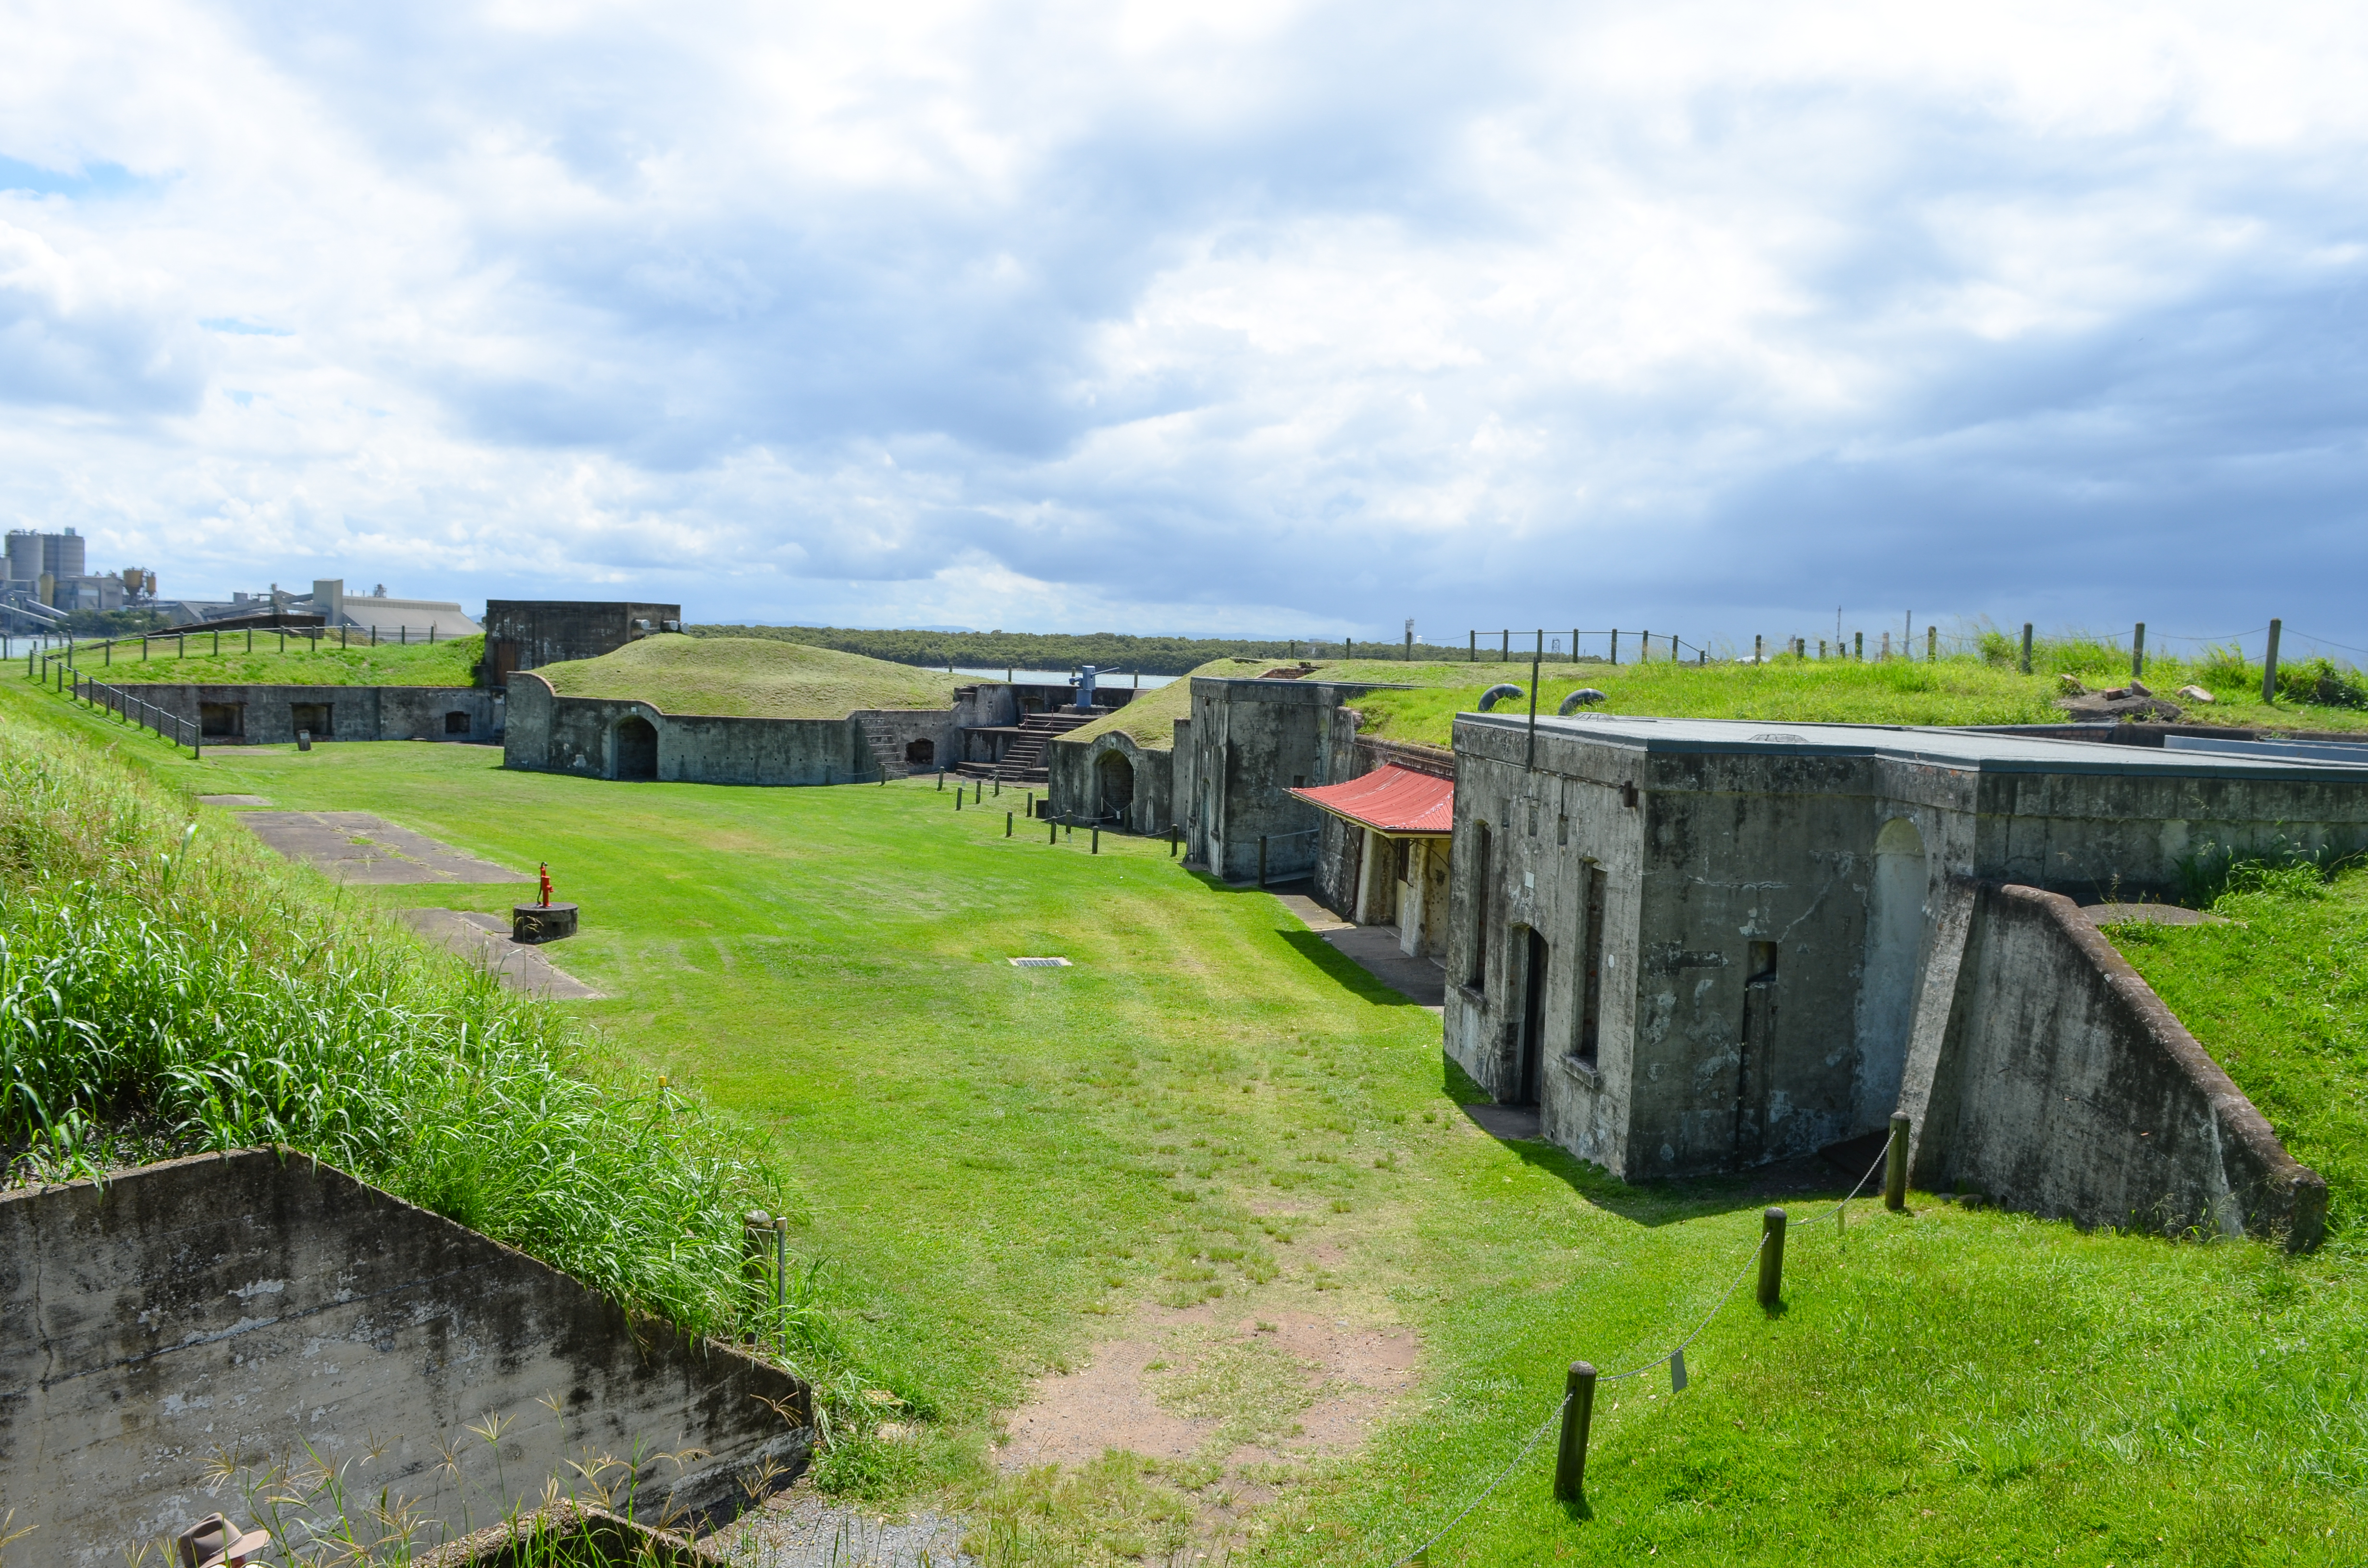 Ruins of buildings sit in green grassy surrounds.